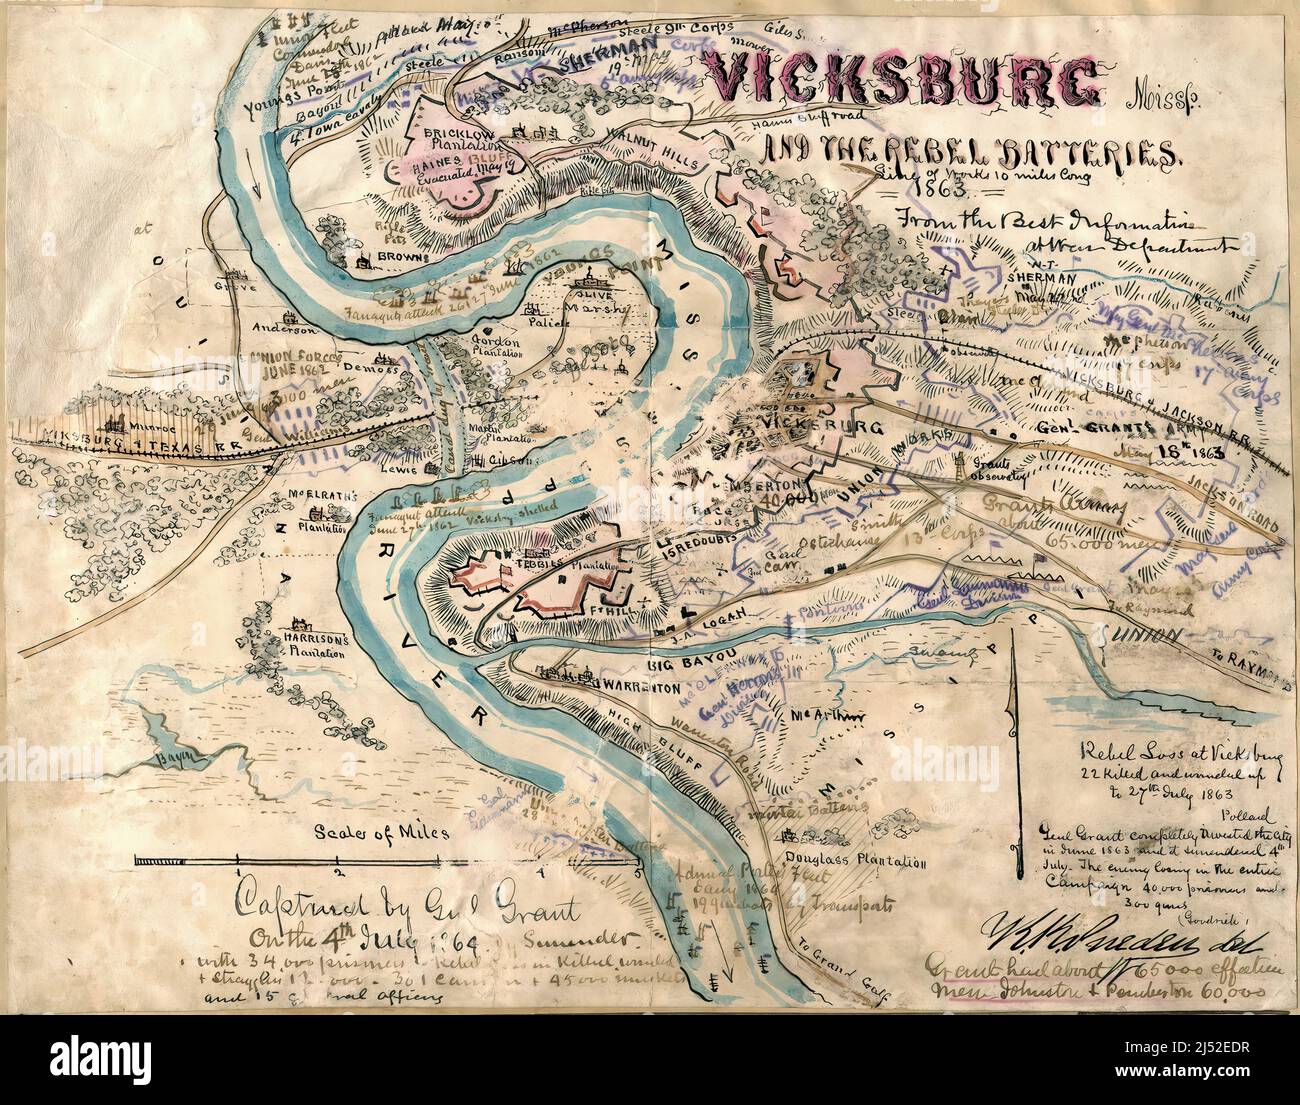 1863 color map of Confederate batteries in Vicksburg, Mississippi, during the American Civil War. Watercolor and pen-and-ink by Robert Knox Sneden. Stock Photo